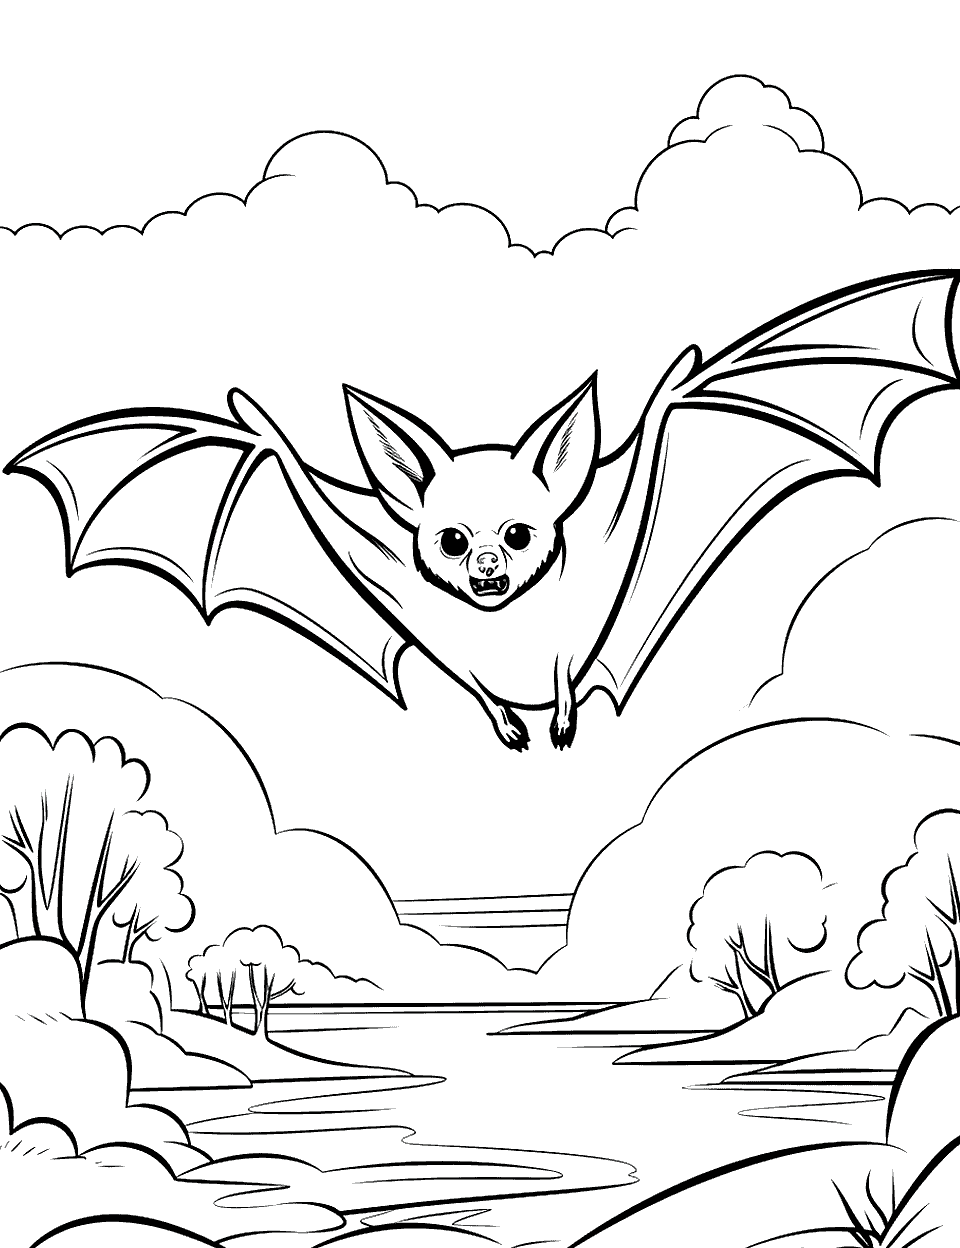 Flying Fox Over a River Bat Coloring Page - A flying fox bat soaring over a serene river.